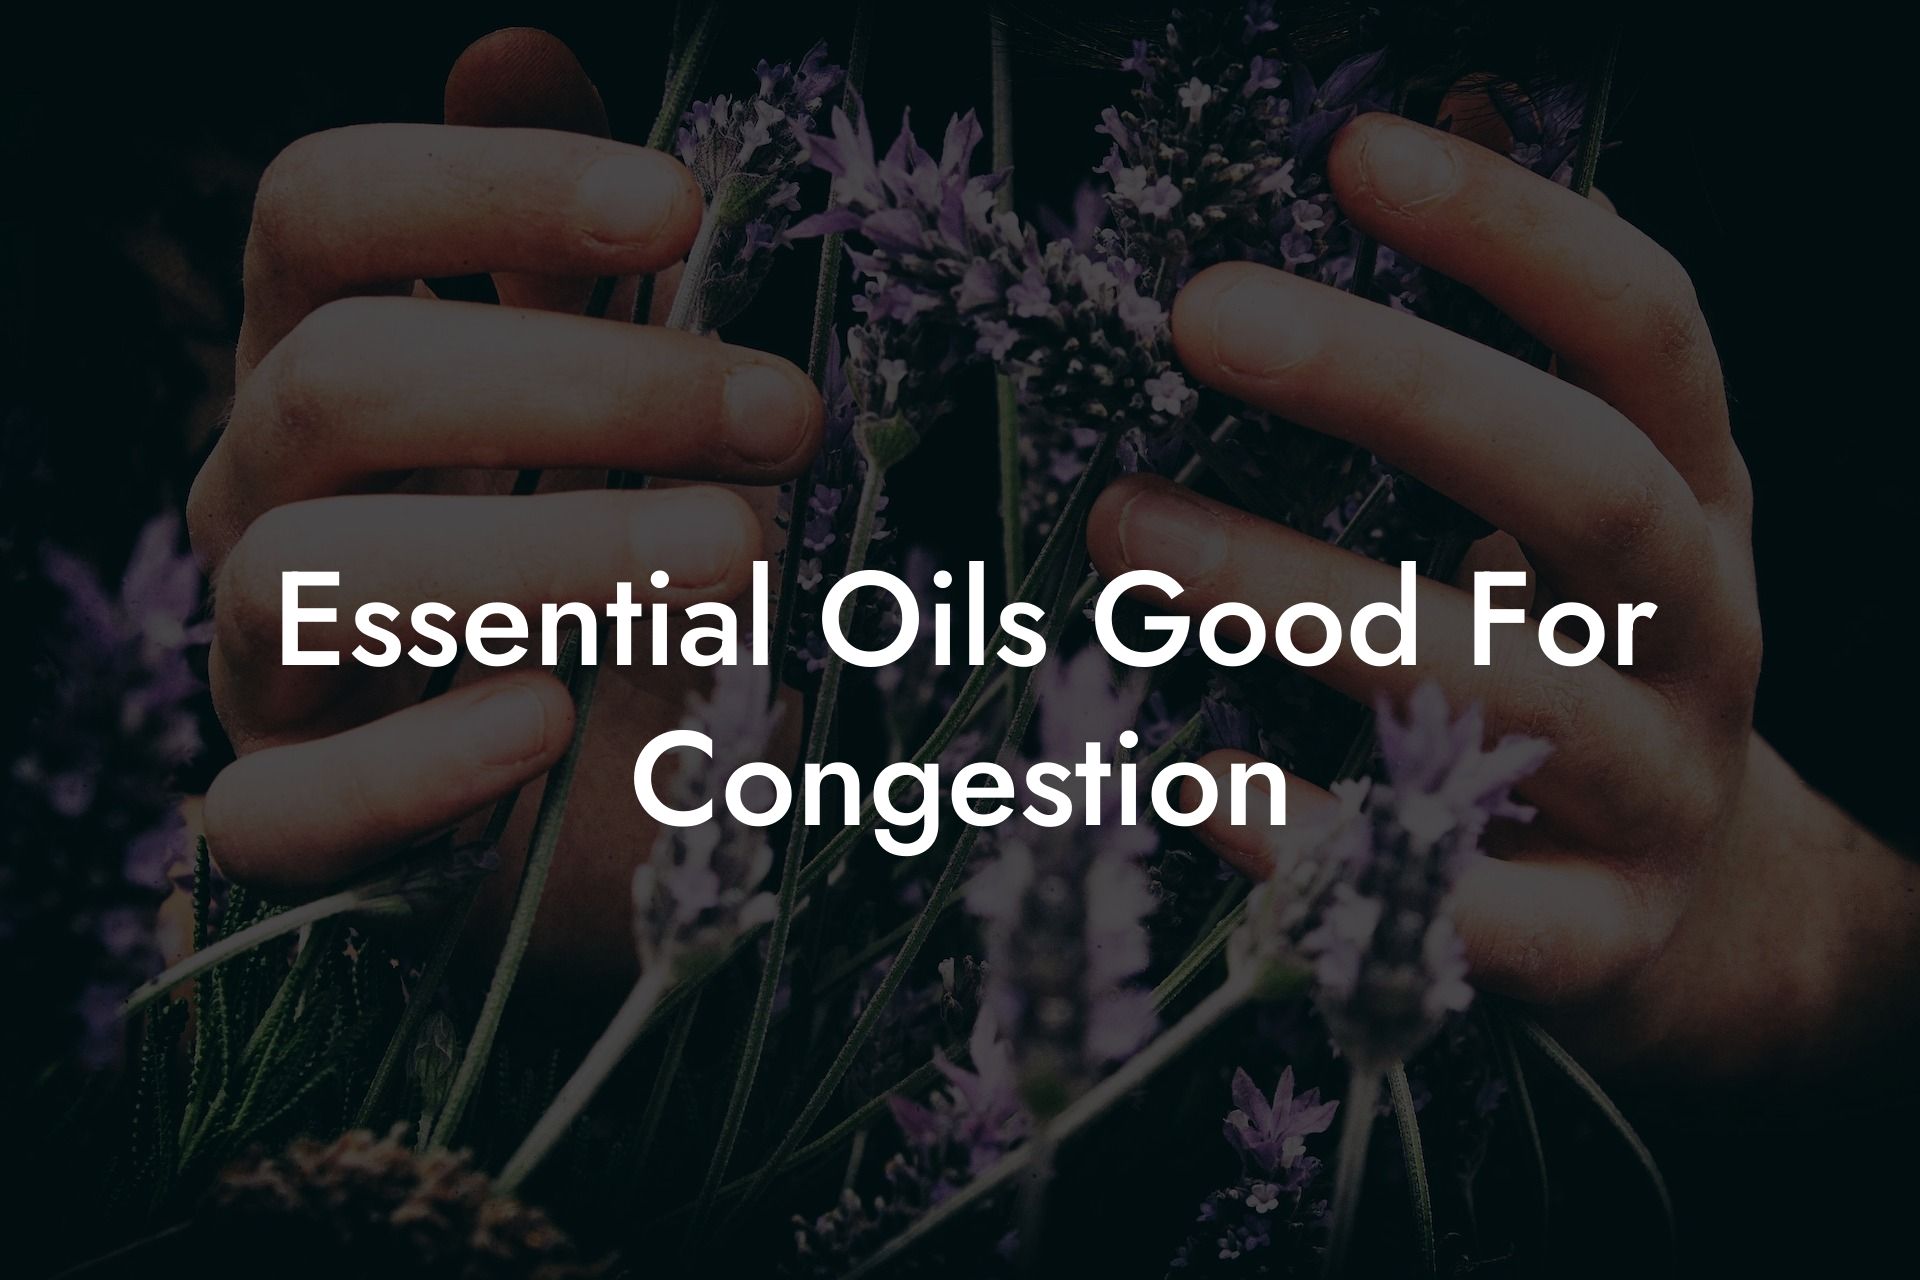 Essential Oils Good For Congestion